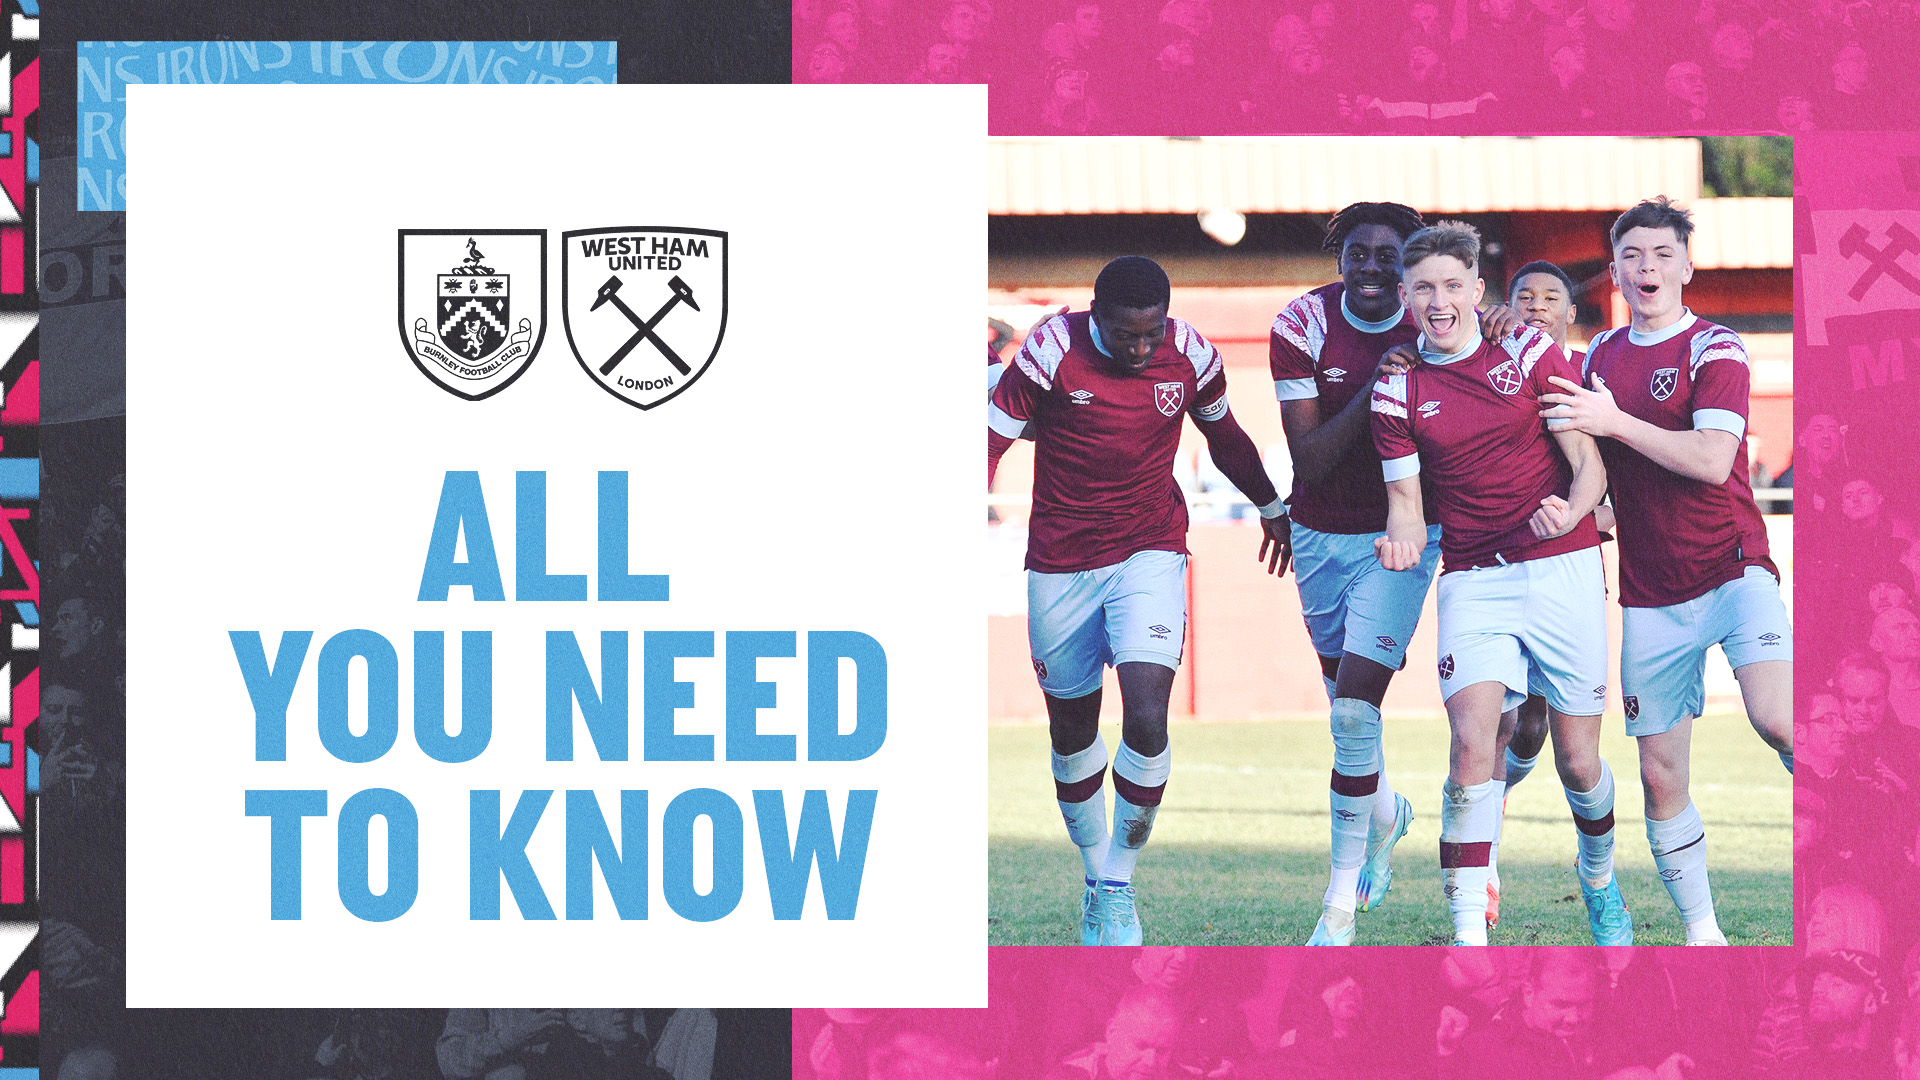 All You need To Know graphic - Burnley U18s v West Ham United u18s